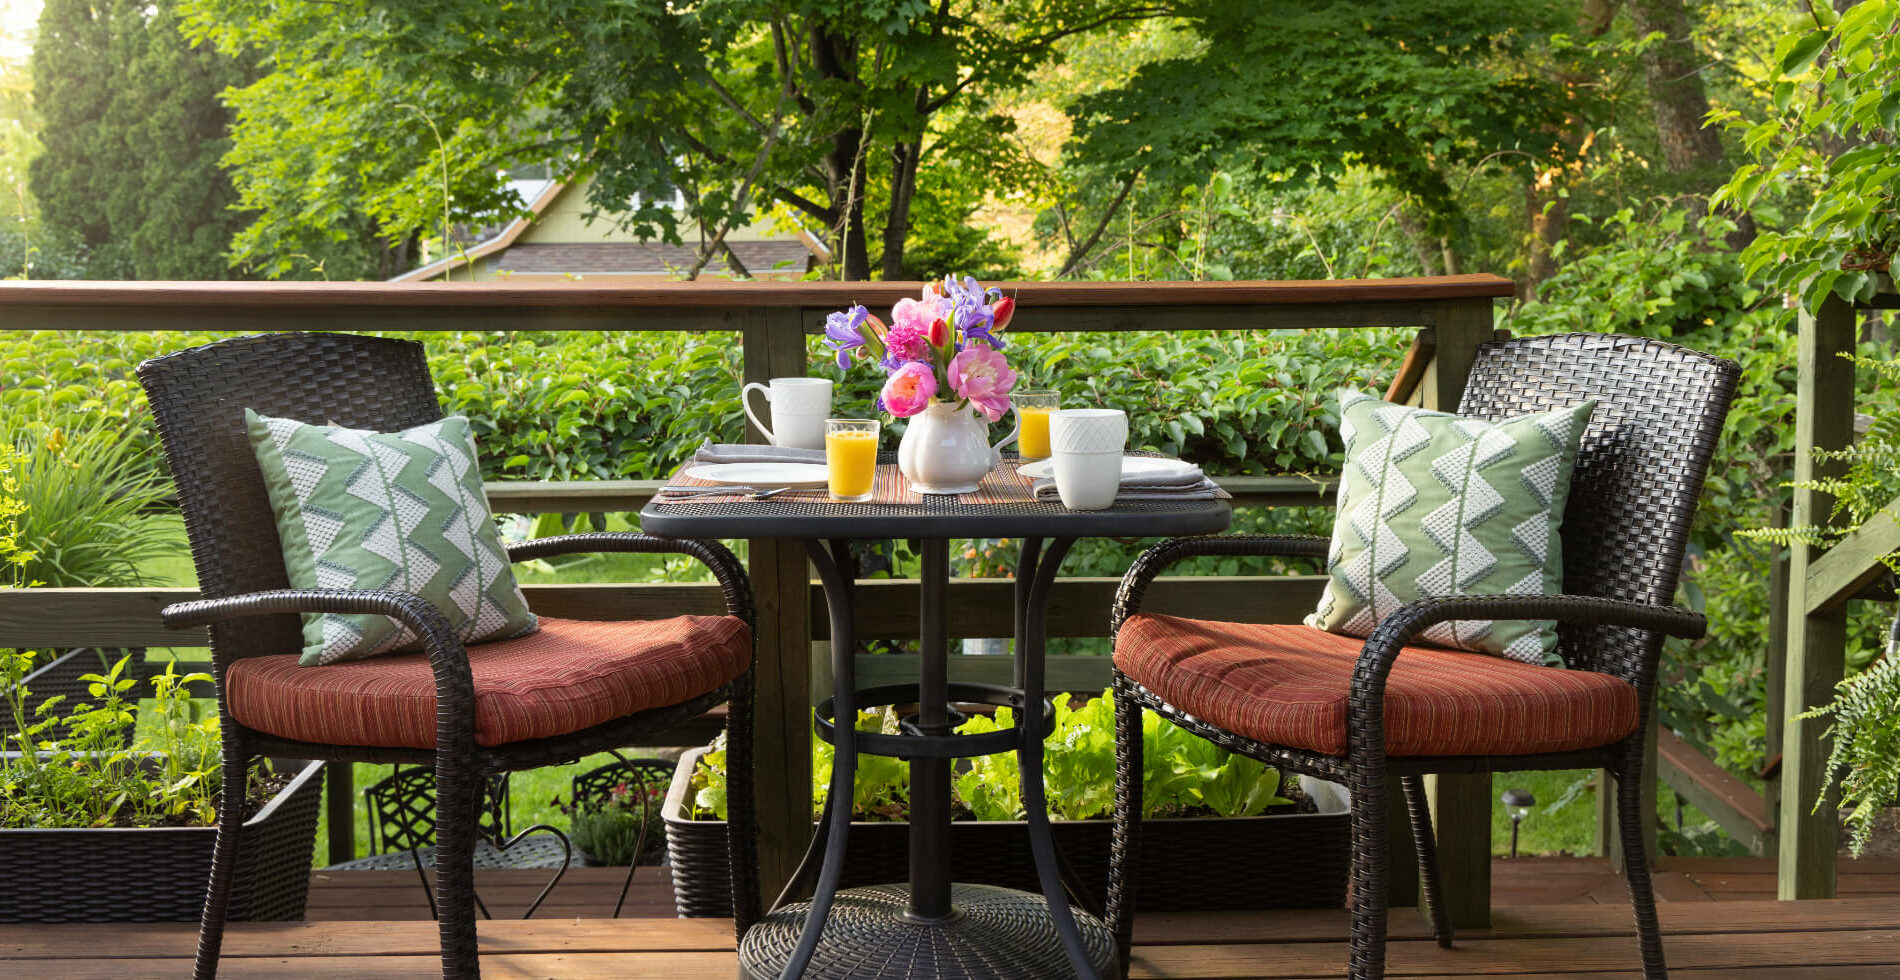 An outdoor dining table and chairs with the table set for breakfast with white plates and coffee cups, glasses of orange juice, and a white pitcher with colorful fresh flowers, with a lush garden and trees in the background.